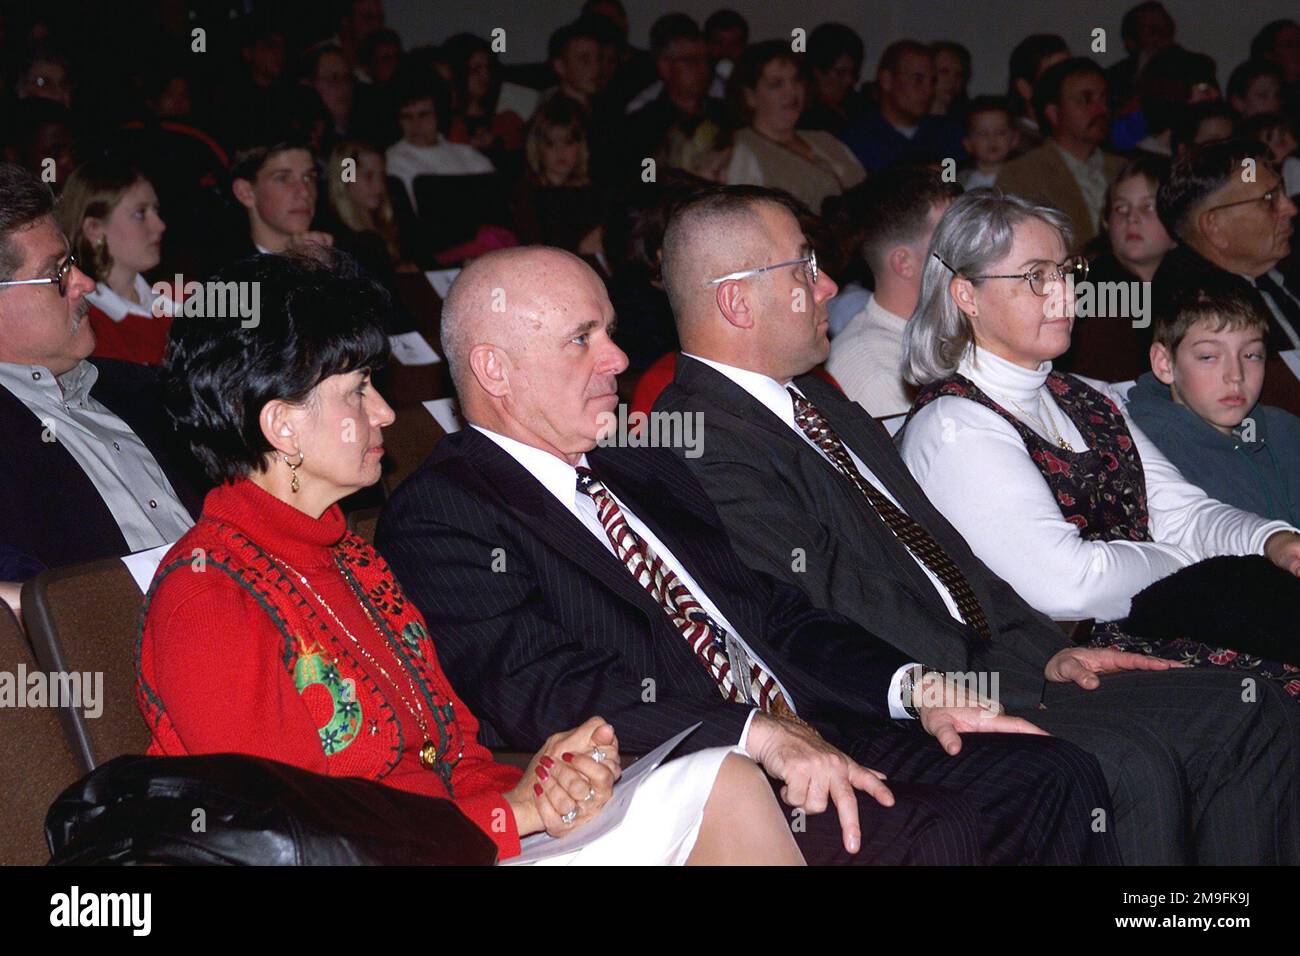 Lieutenant General Leon J. Laporte, Commander III Corps and Fort Hood (second from left), his wife Judy (in red), III Corps Command Sergeant Major Dennis Webster, and wife Sandra enjoy the 20th annual performance of Handel's Messiah Concert at Palmer Theater, Fort Hood Texas on 17 December 2000. Base: Fort Hood State: Texas (TX) Country: United States Of America (USA) Scene Major Command Shown: MACOMS Stock Photo